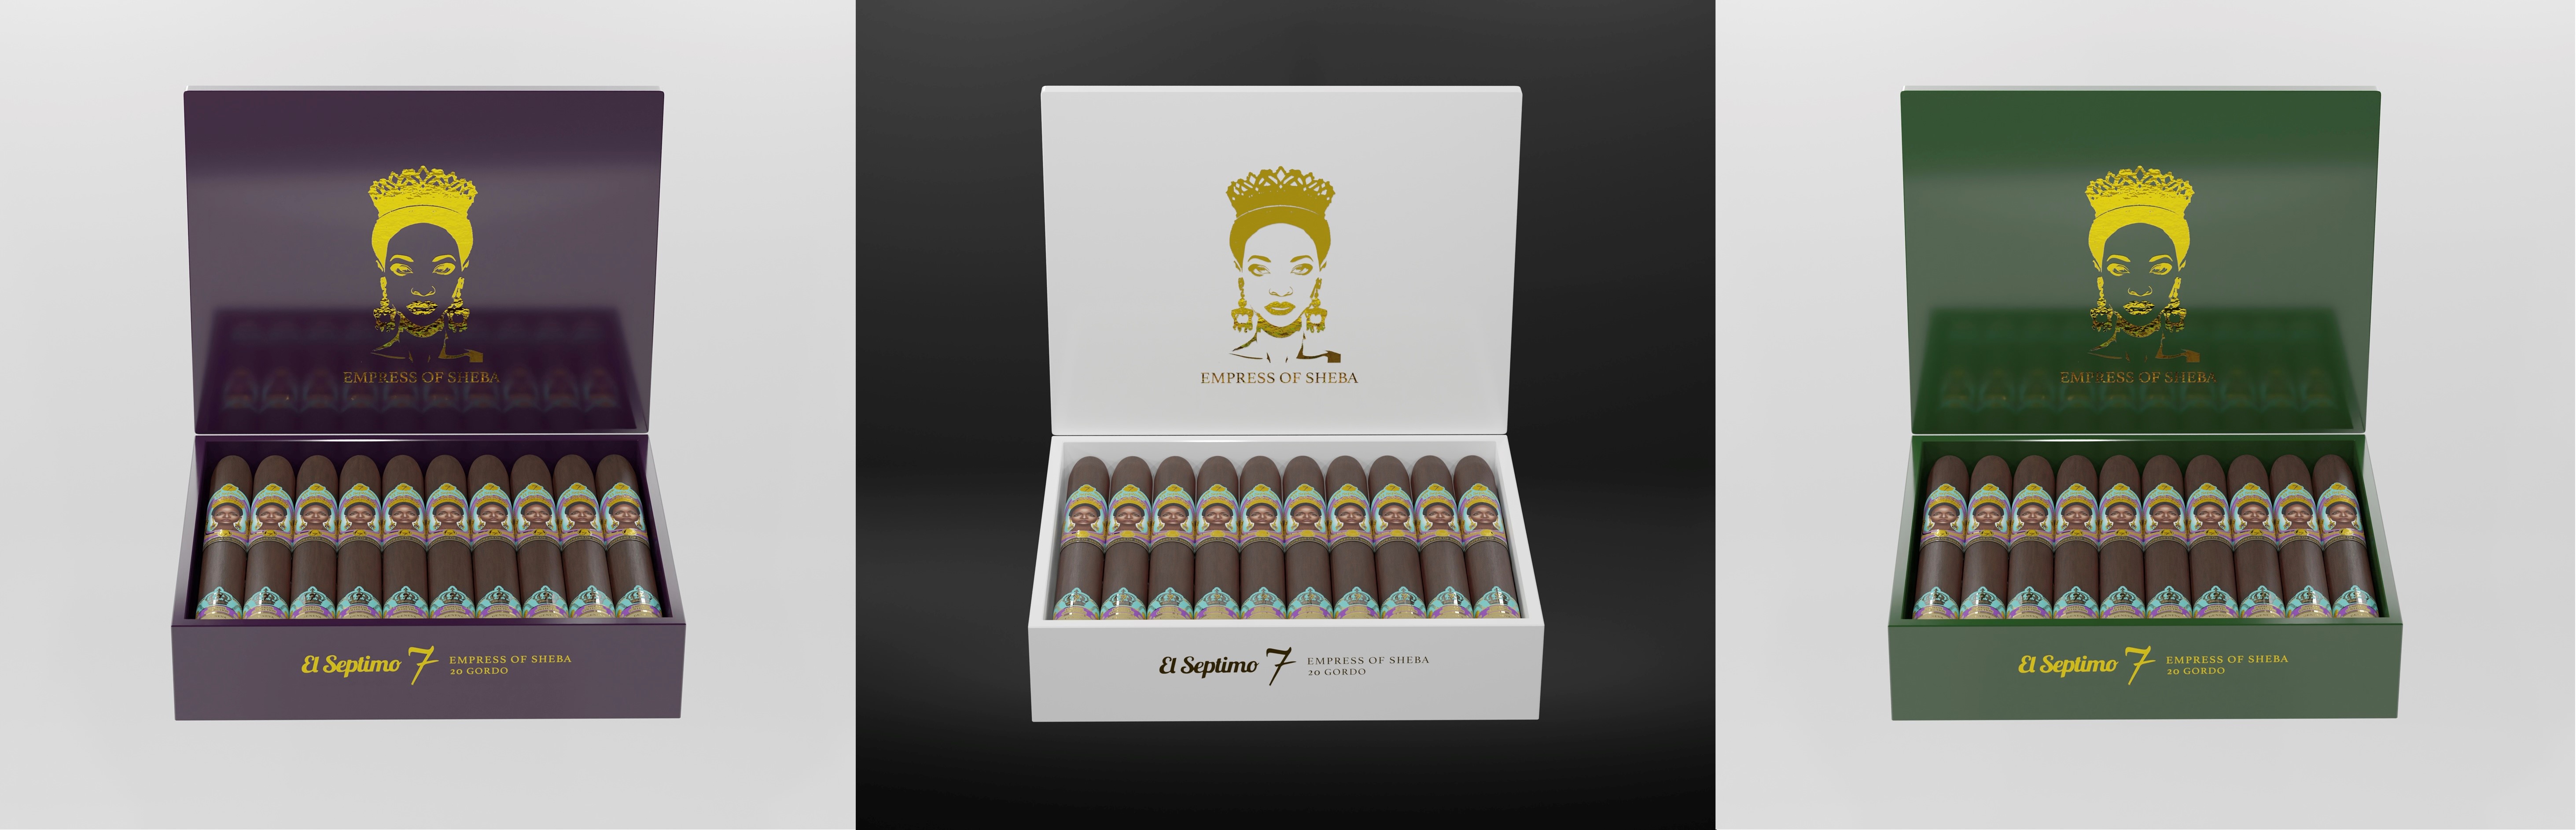 El Septimo to Introduce “Chose-Your-Color” Packaging for its Cigars Boxes